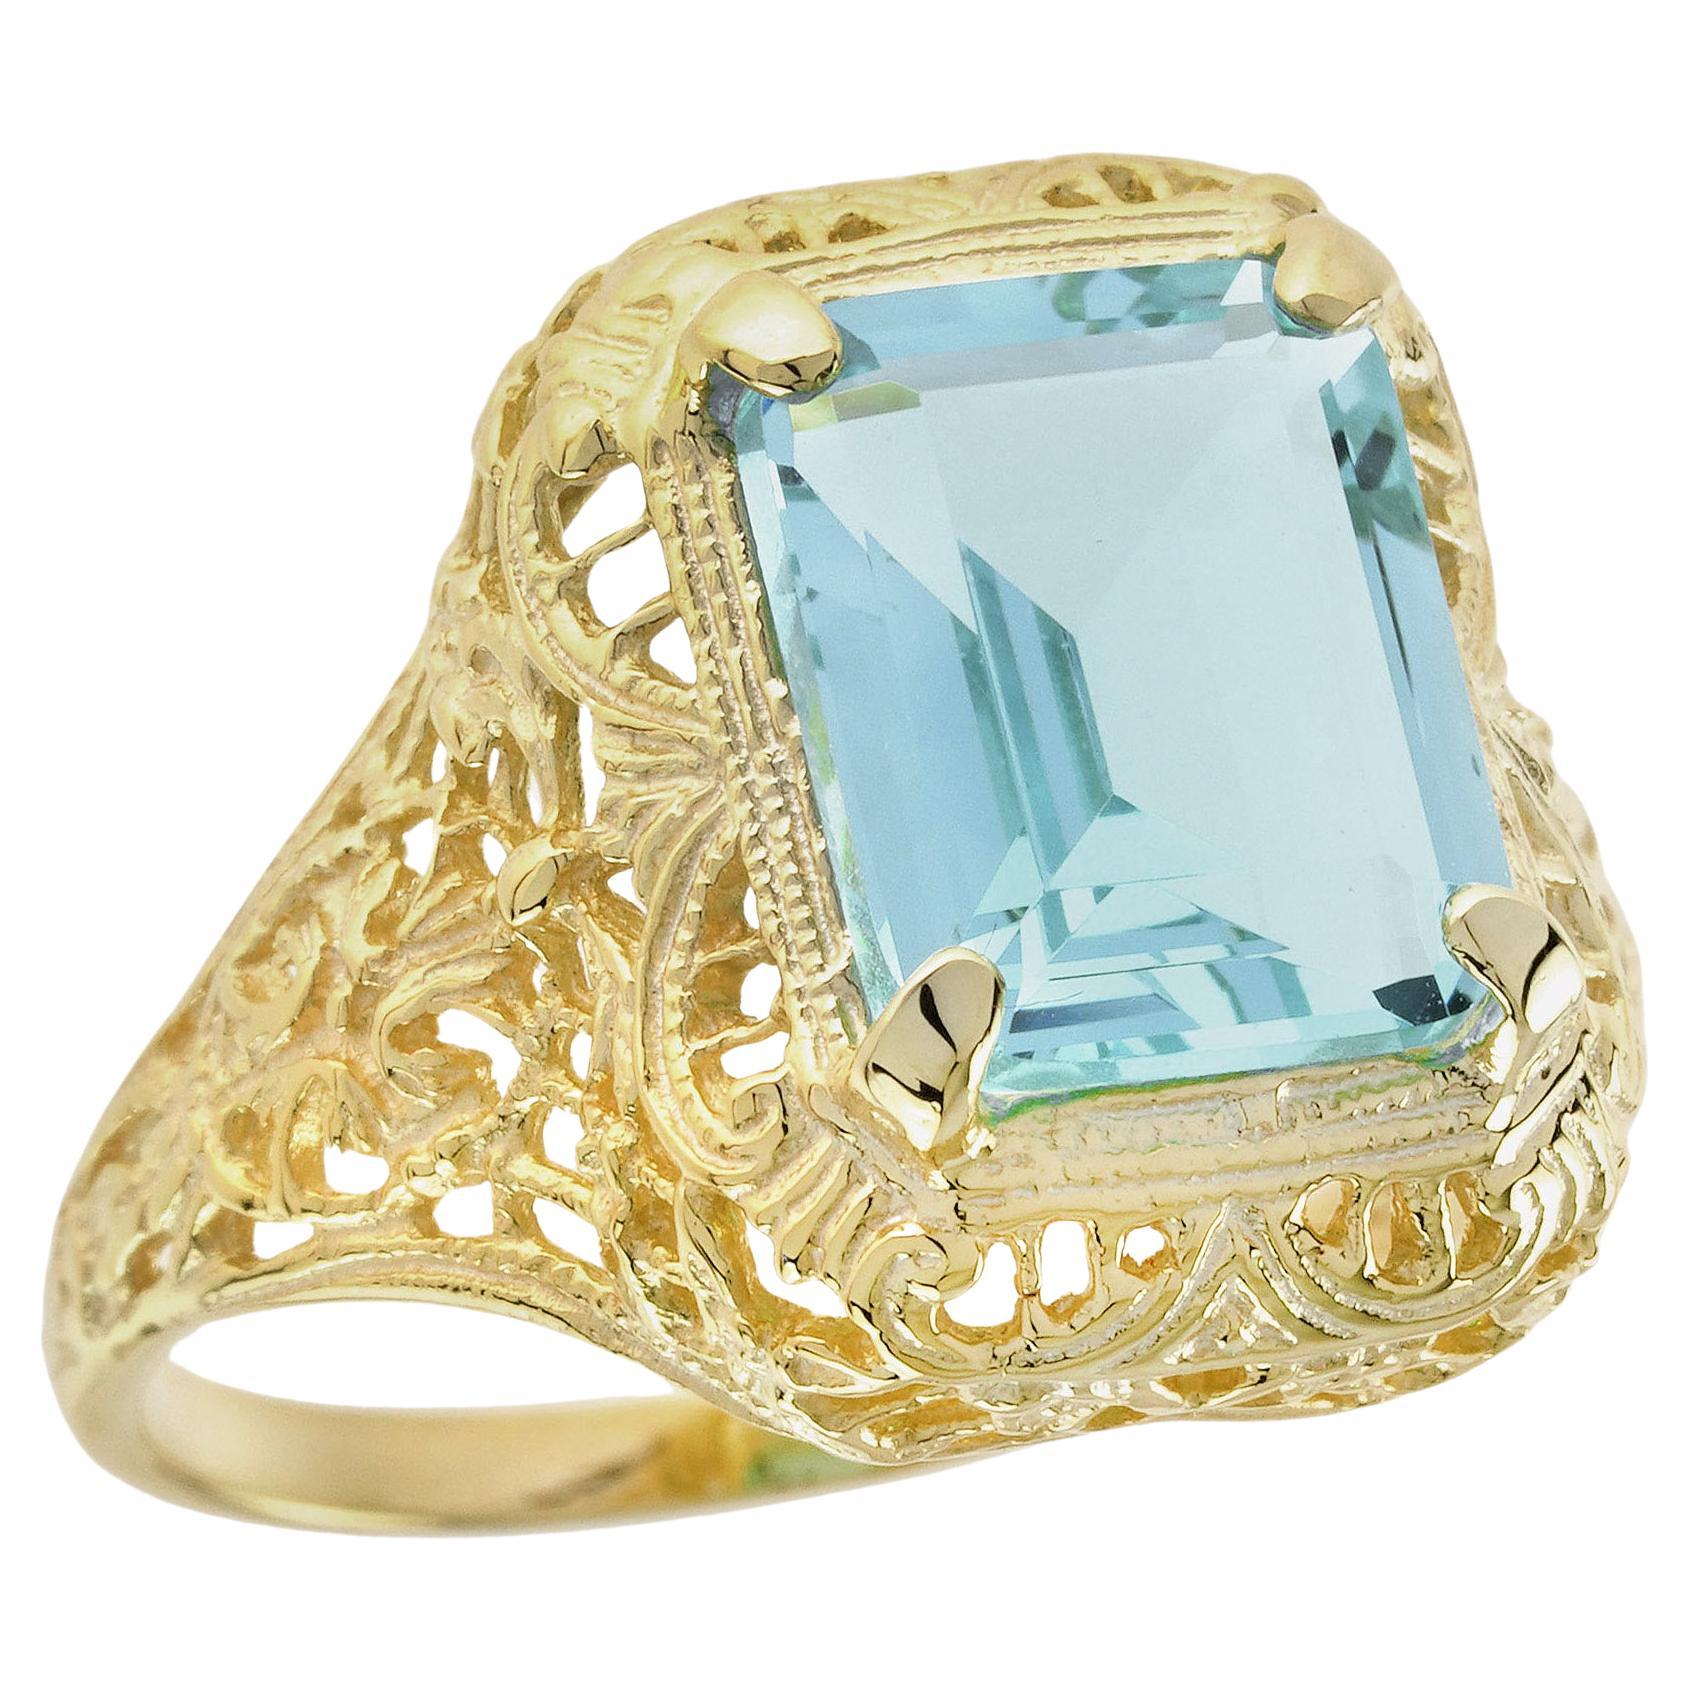 Natural Aquamarine Vintage Style Filigree Ring in Solid 9K Yellow Gold